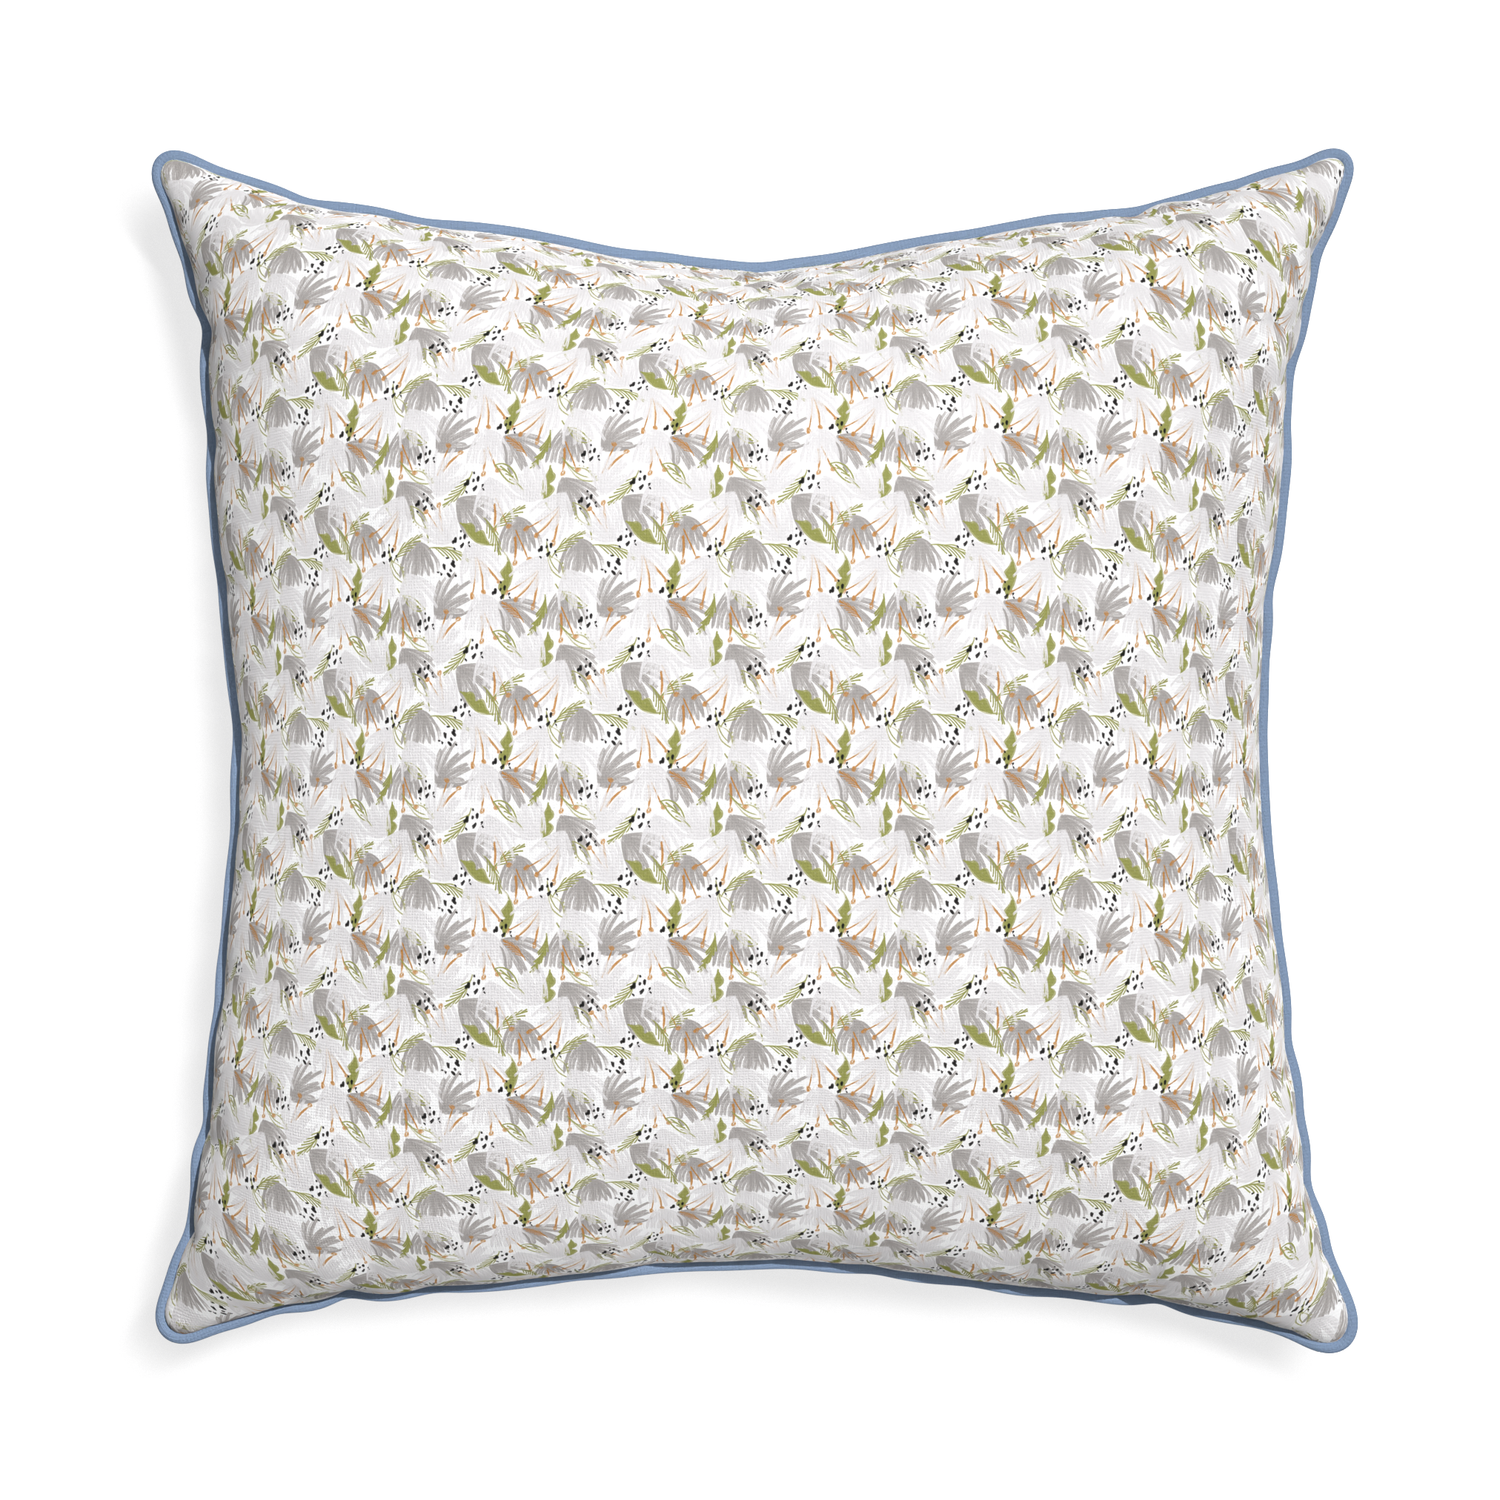 Euro-sham eden grey custom pillow with sky piping on white background